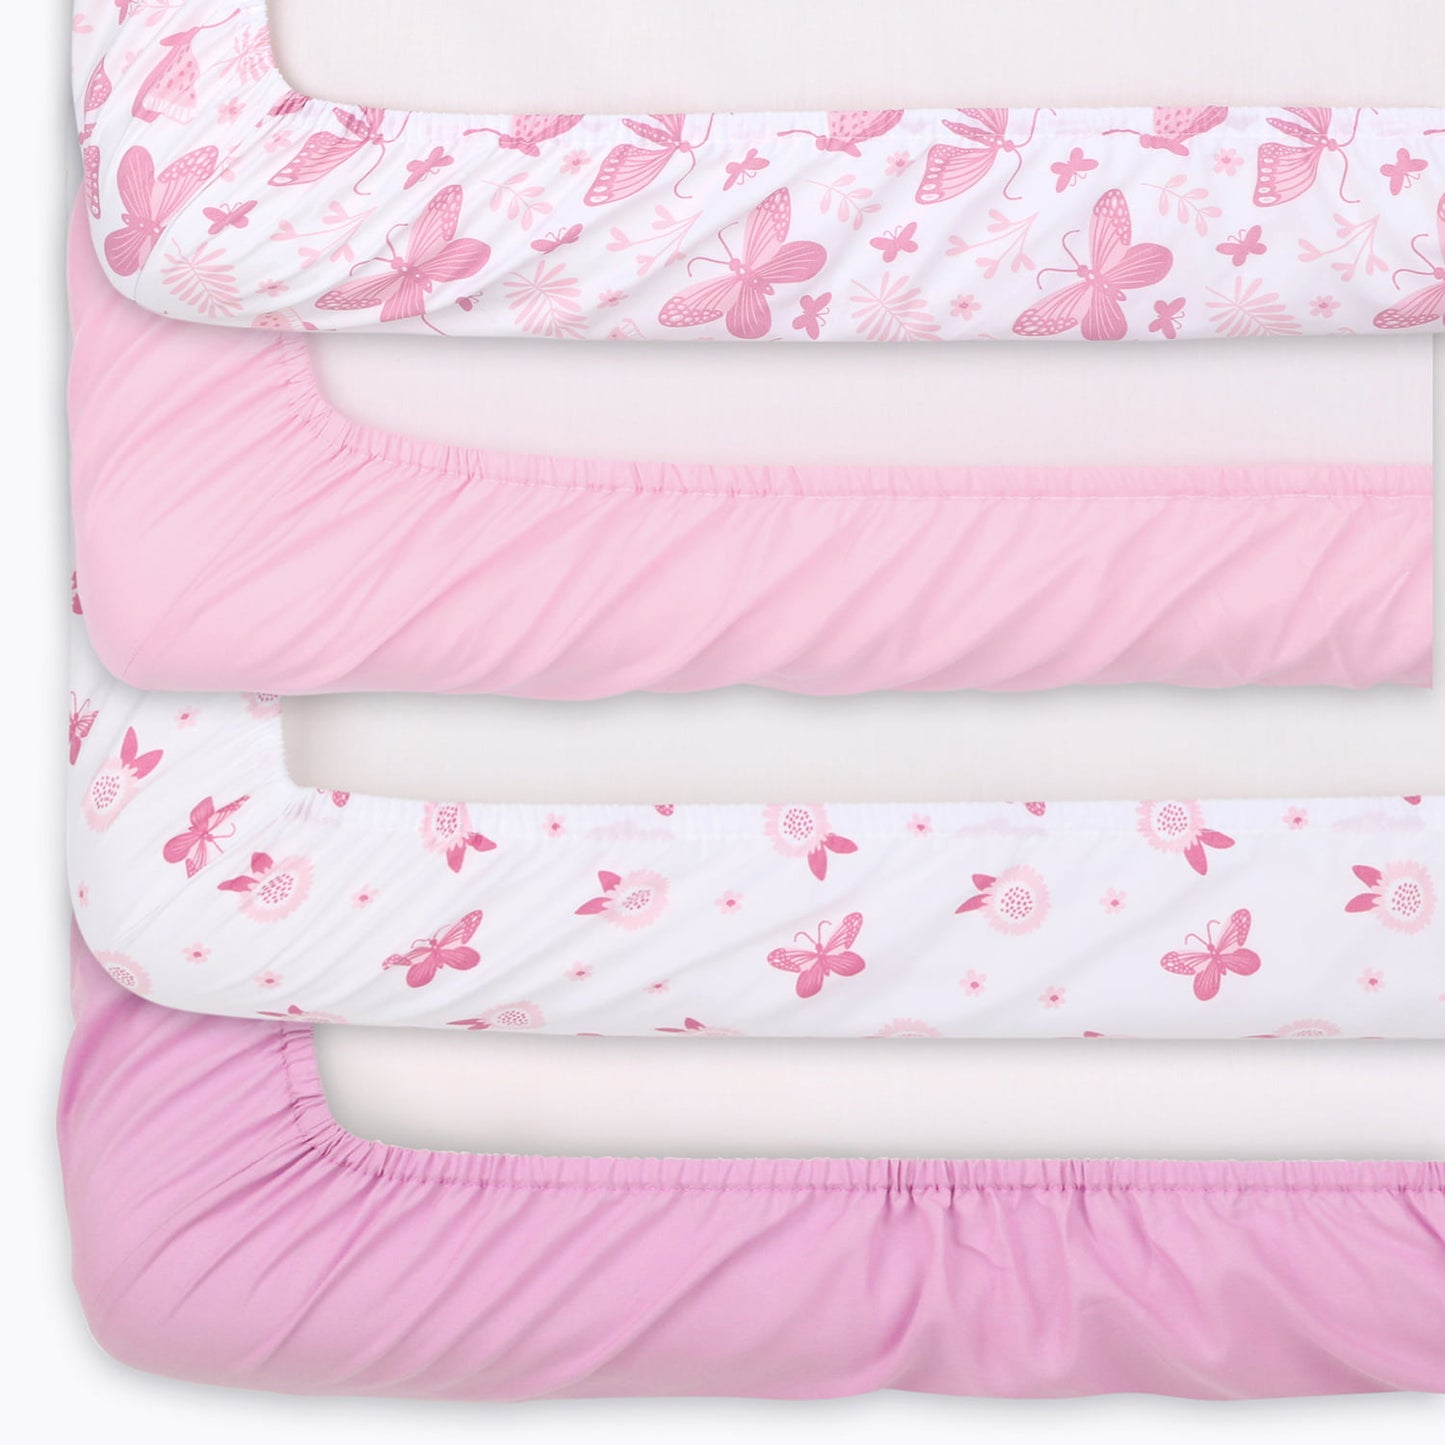 Enchanting Garden Dreams Fitted Crib Sheets - 6 Pack